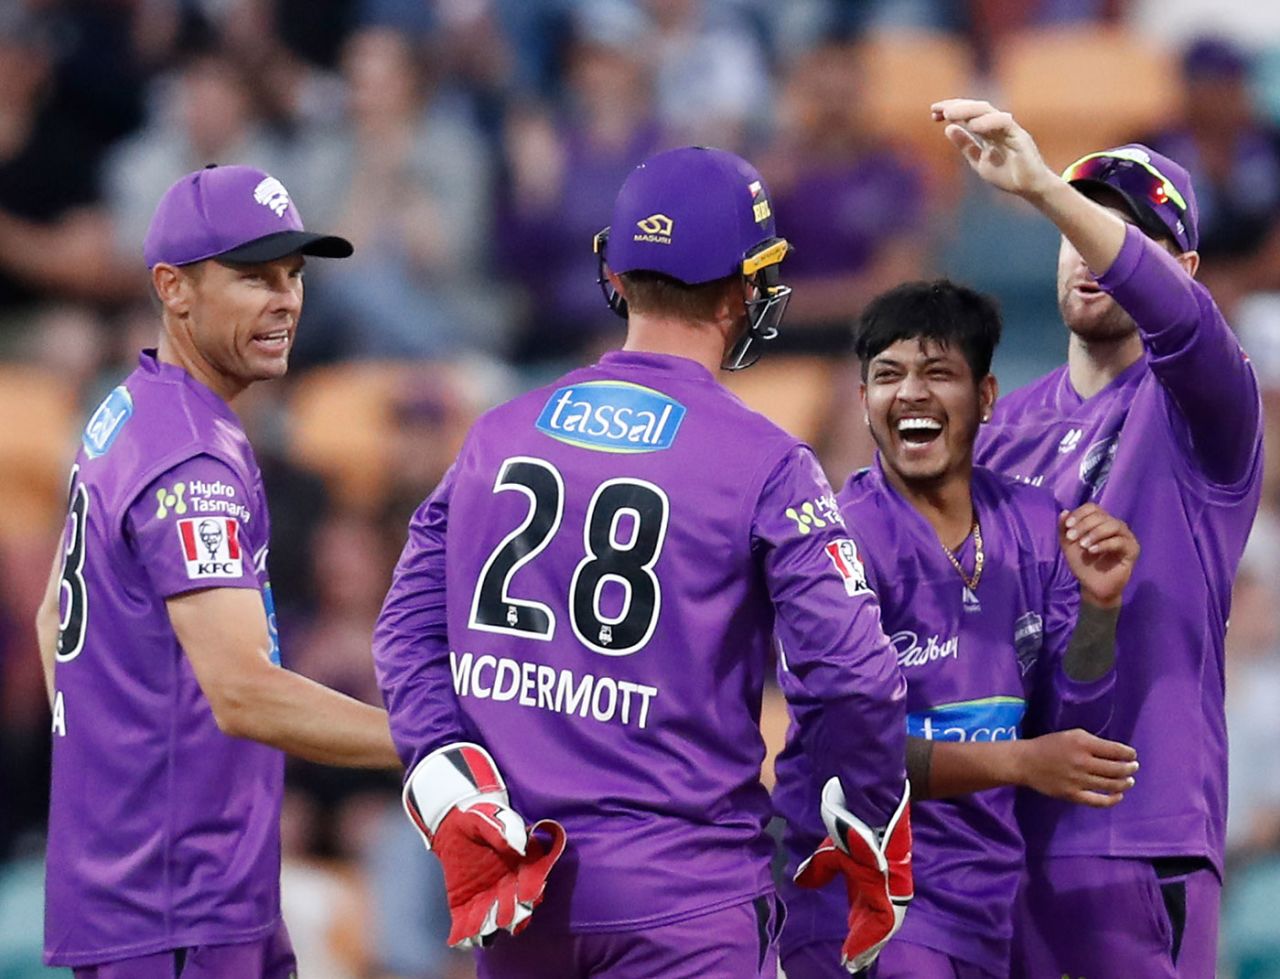 Sandeep Lamichhane made his first appearance of the tournament, Hobart Hurricanes vs Melbourne Stars, Blundstone Arena, BBL 2020-21, January 2, 2021